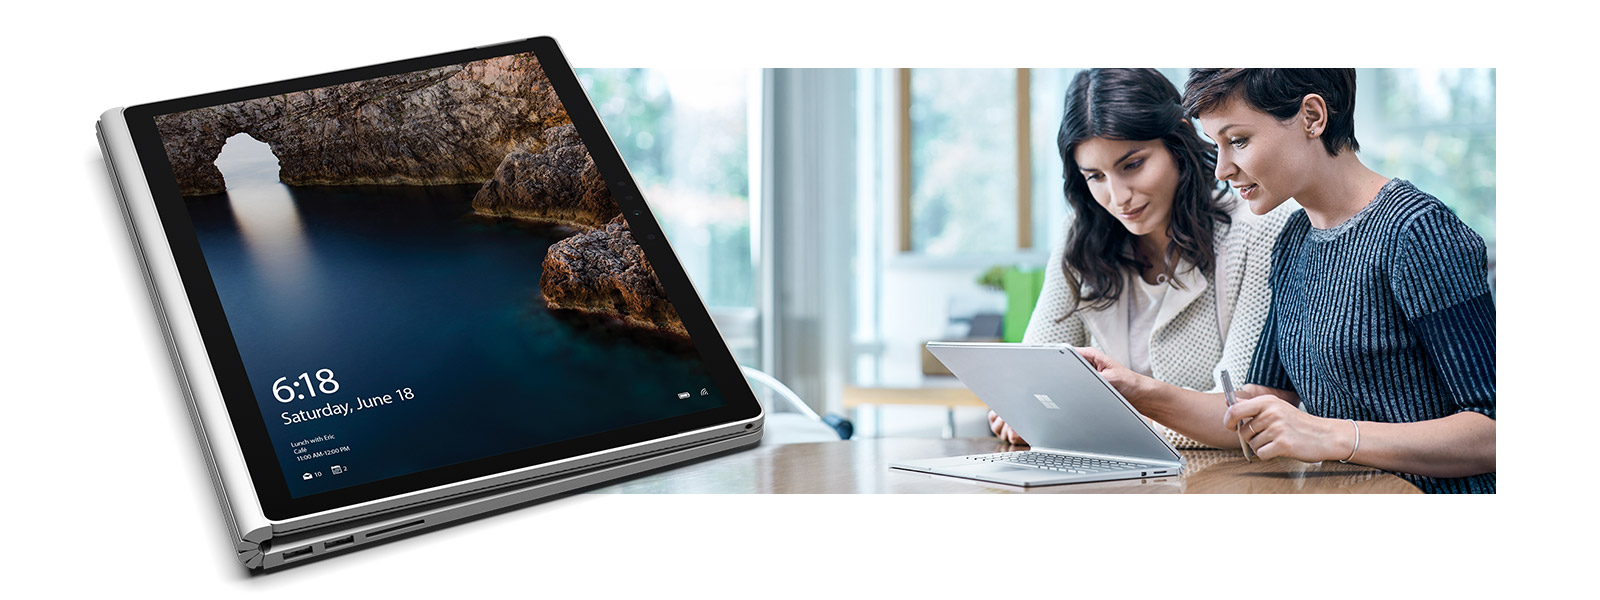 Surface Book in draw mode next to an image of two women working on a Surface Book on a desk